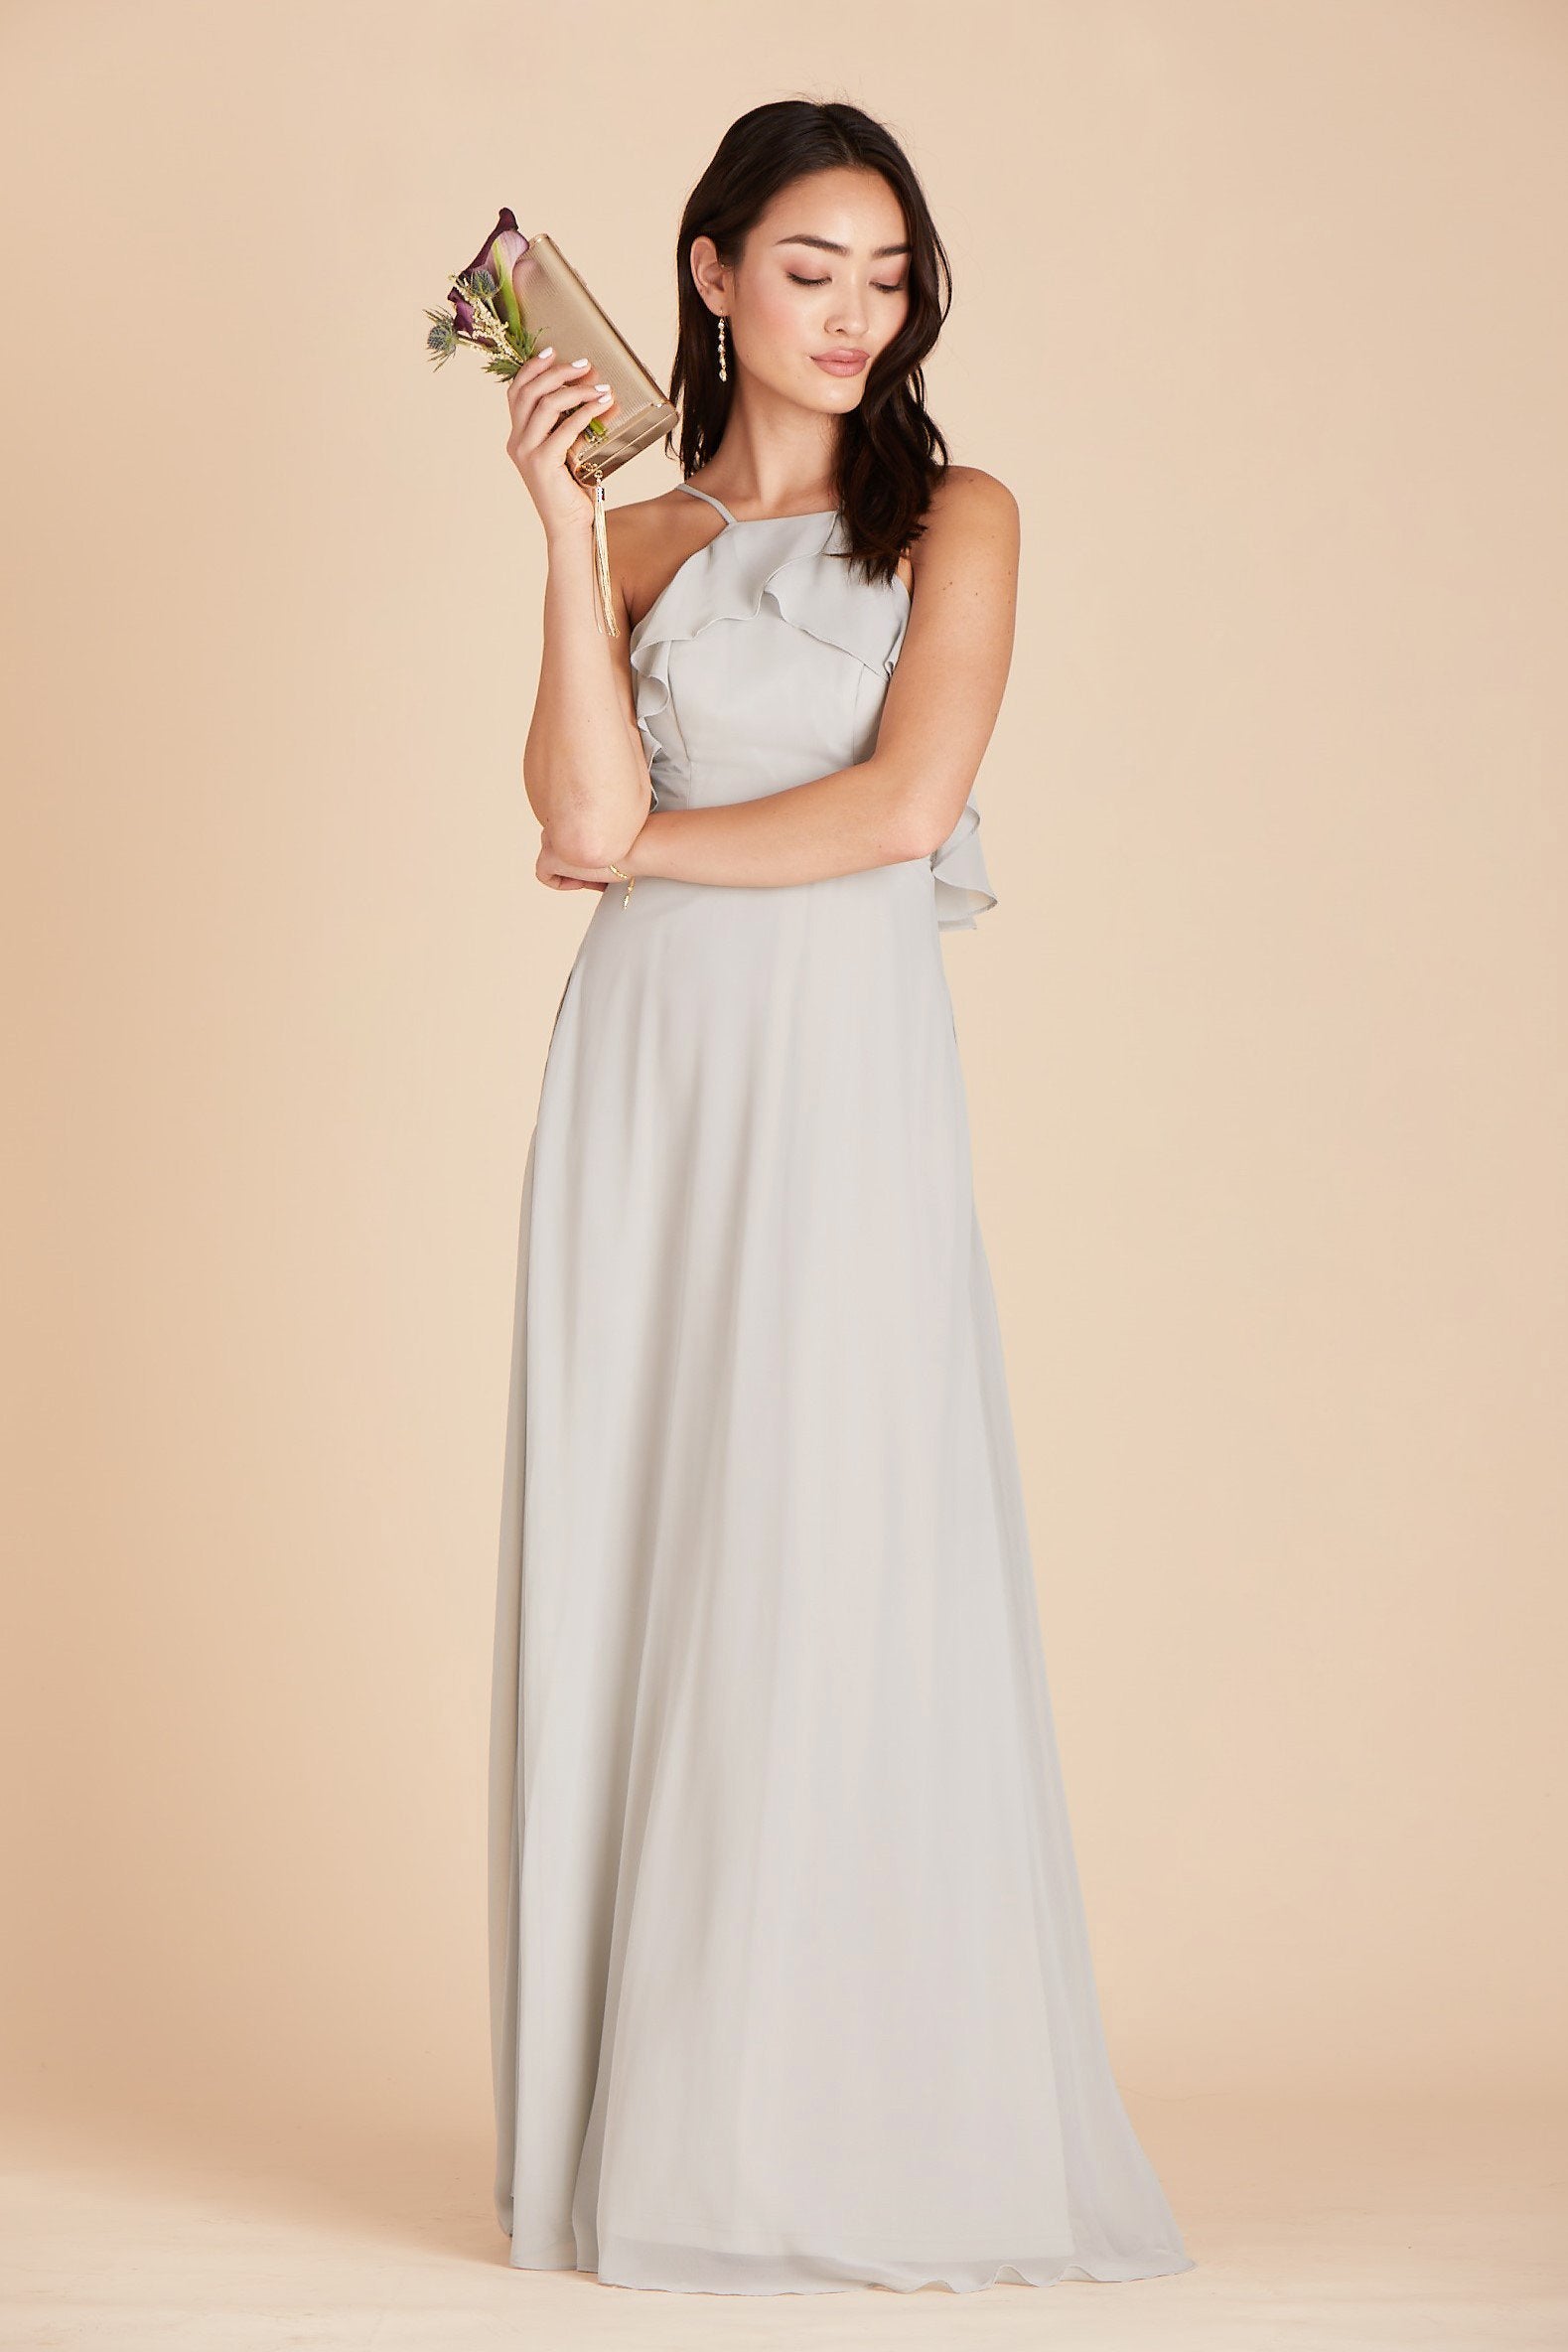 Jules bridesmaid dress in dove gray chiffon by Birdy Grey, front view